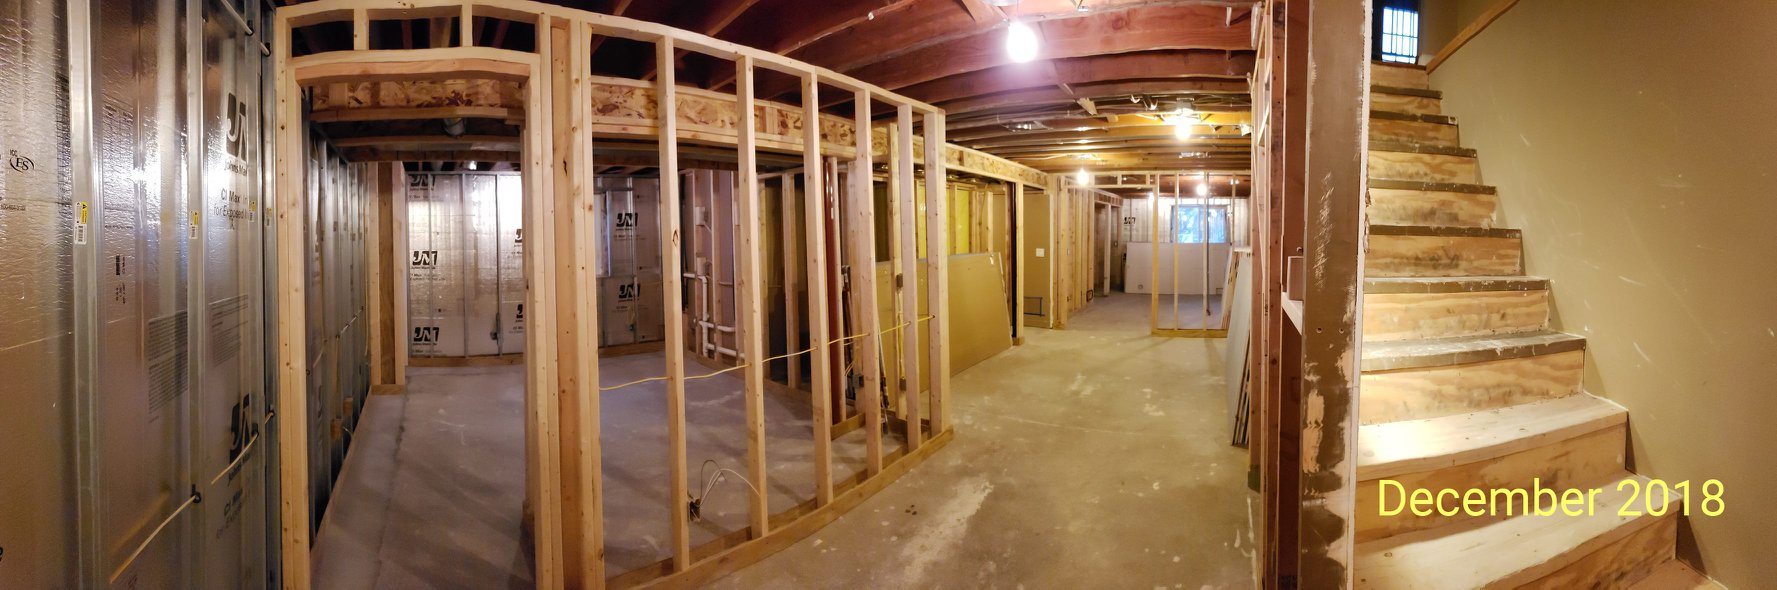 Panoramic view of an unfinished basement with bare stud walls as seen in December 2018.